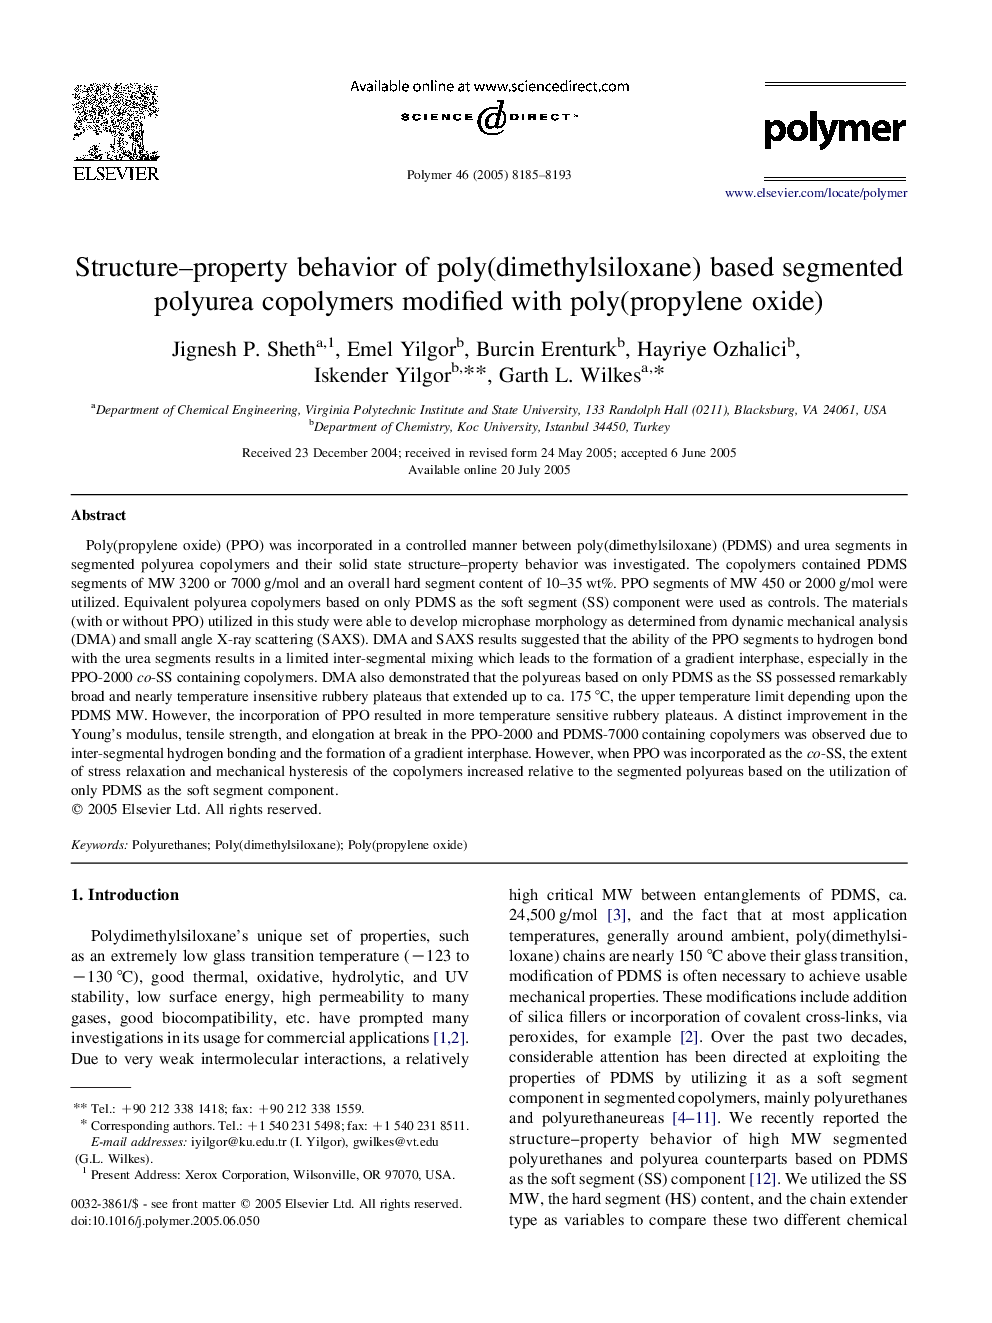 Structure-property behavior of poly(dimethylsiloxane) based segmented polyurea copolymers modified with poly(propylene oxide)